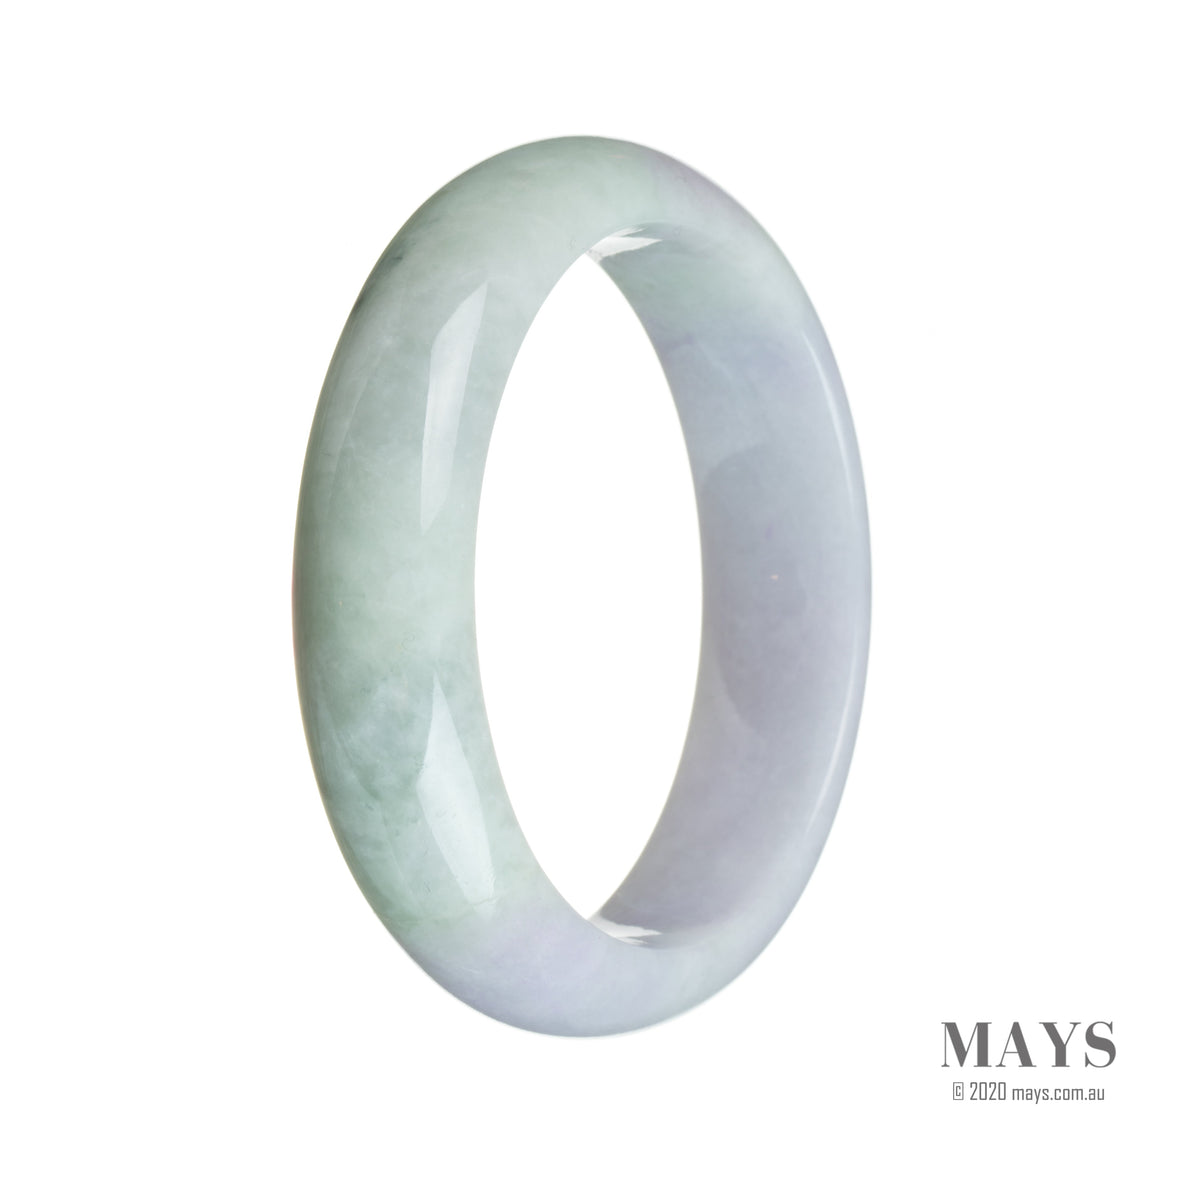 A lavender-colored bracelet made with genuine Type A Burmese Jade, featuring a semi-round shape and measuring 59mm in diameter.